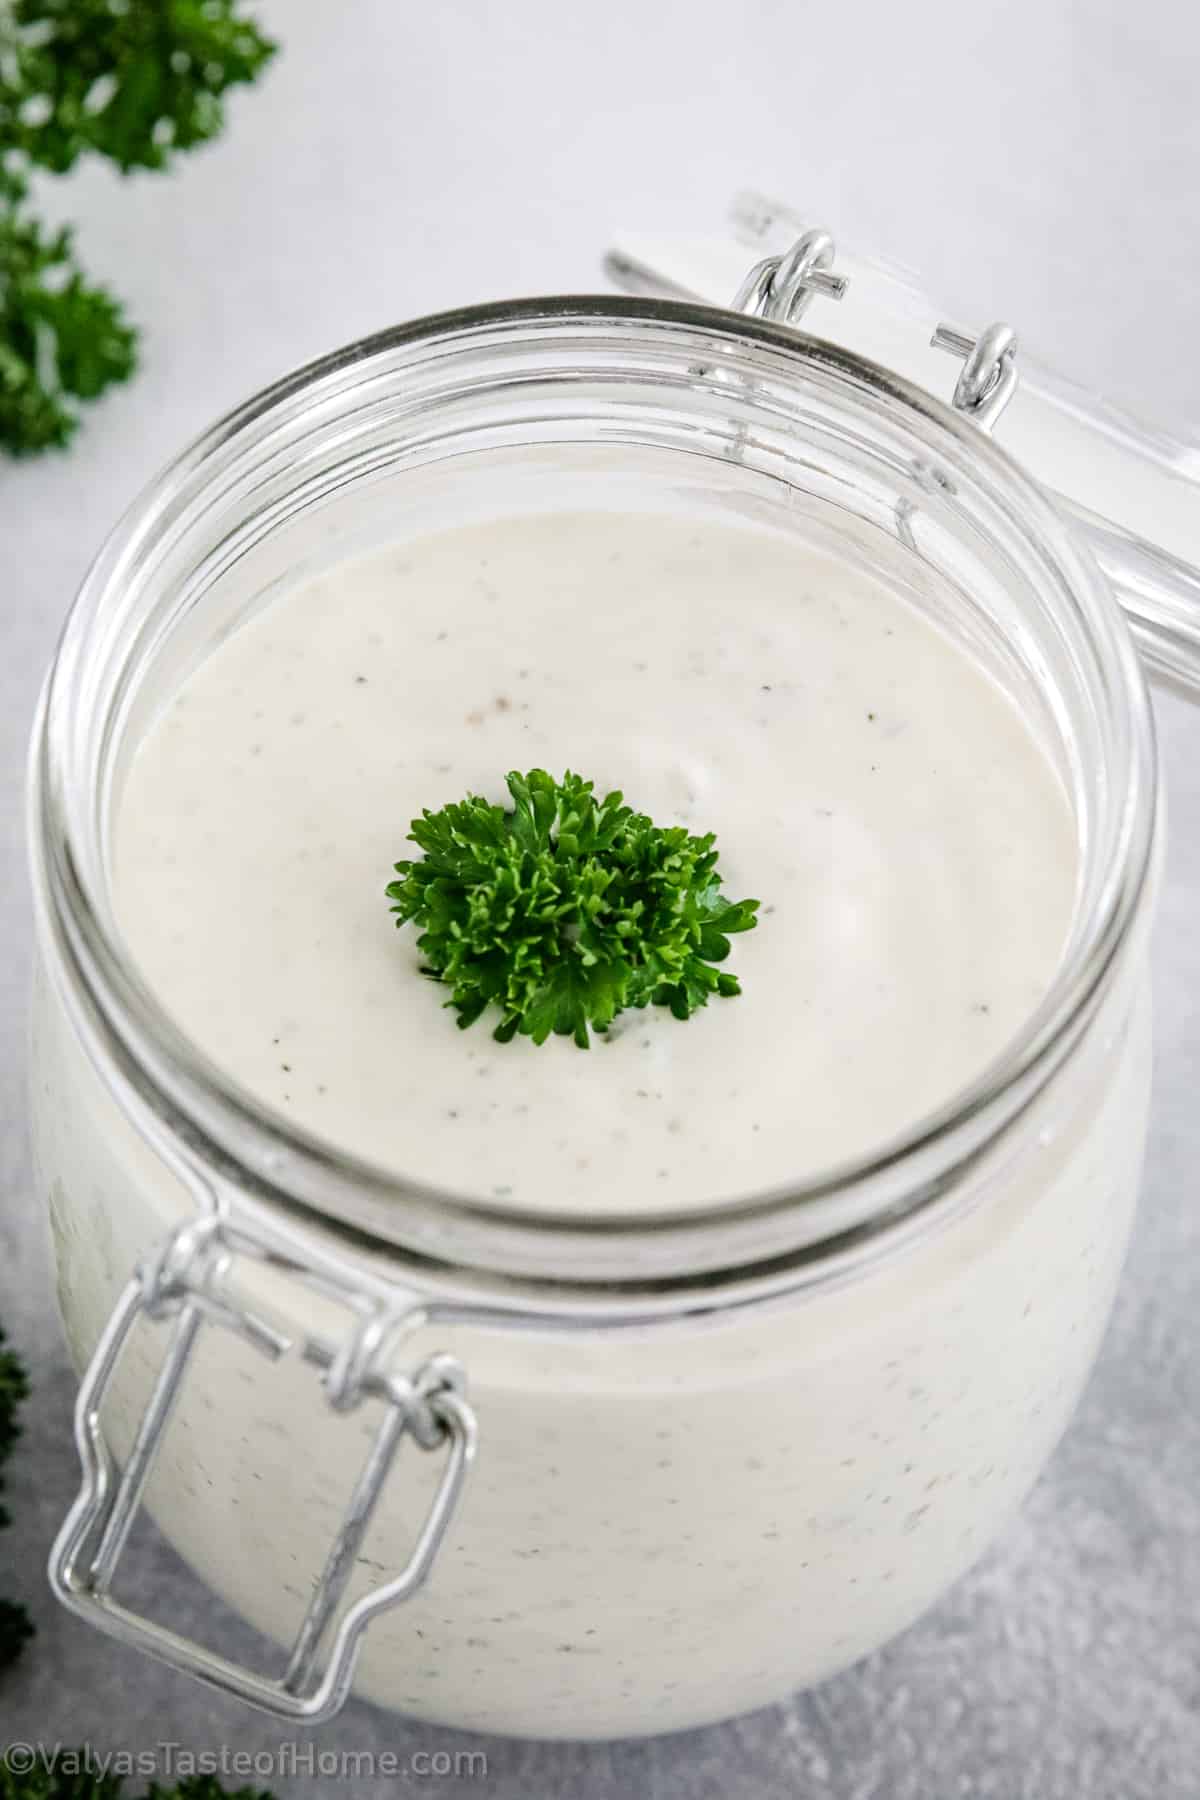 Ranch dressing is a popular condiment made from ingredients such as mayonnaise, buttermilk, garlic, and dried herbs.